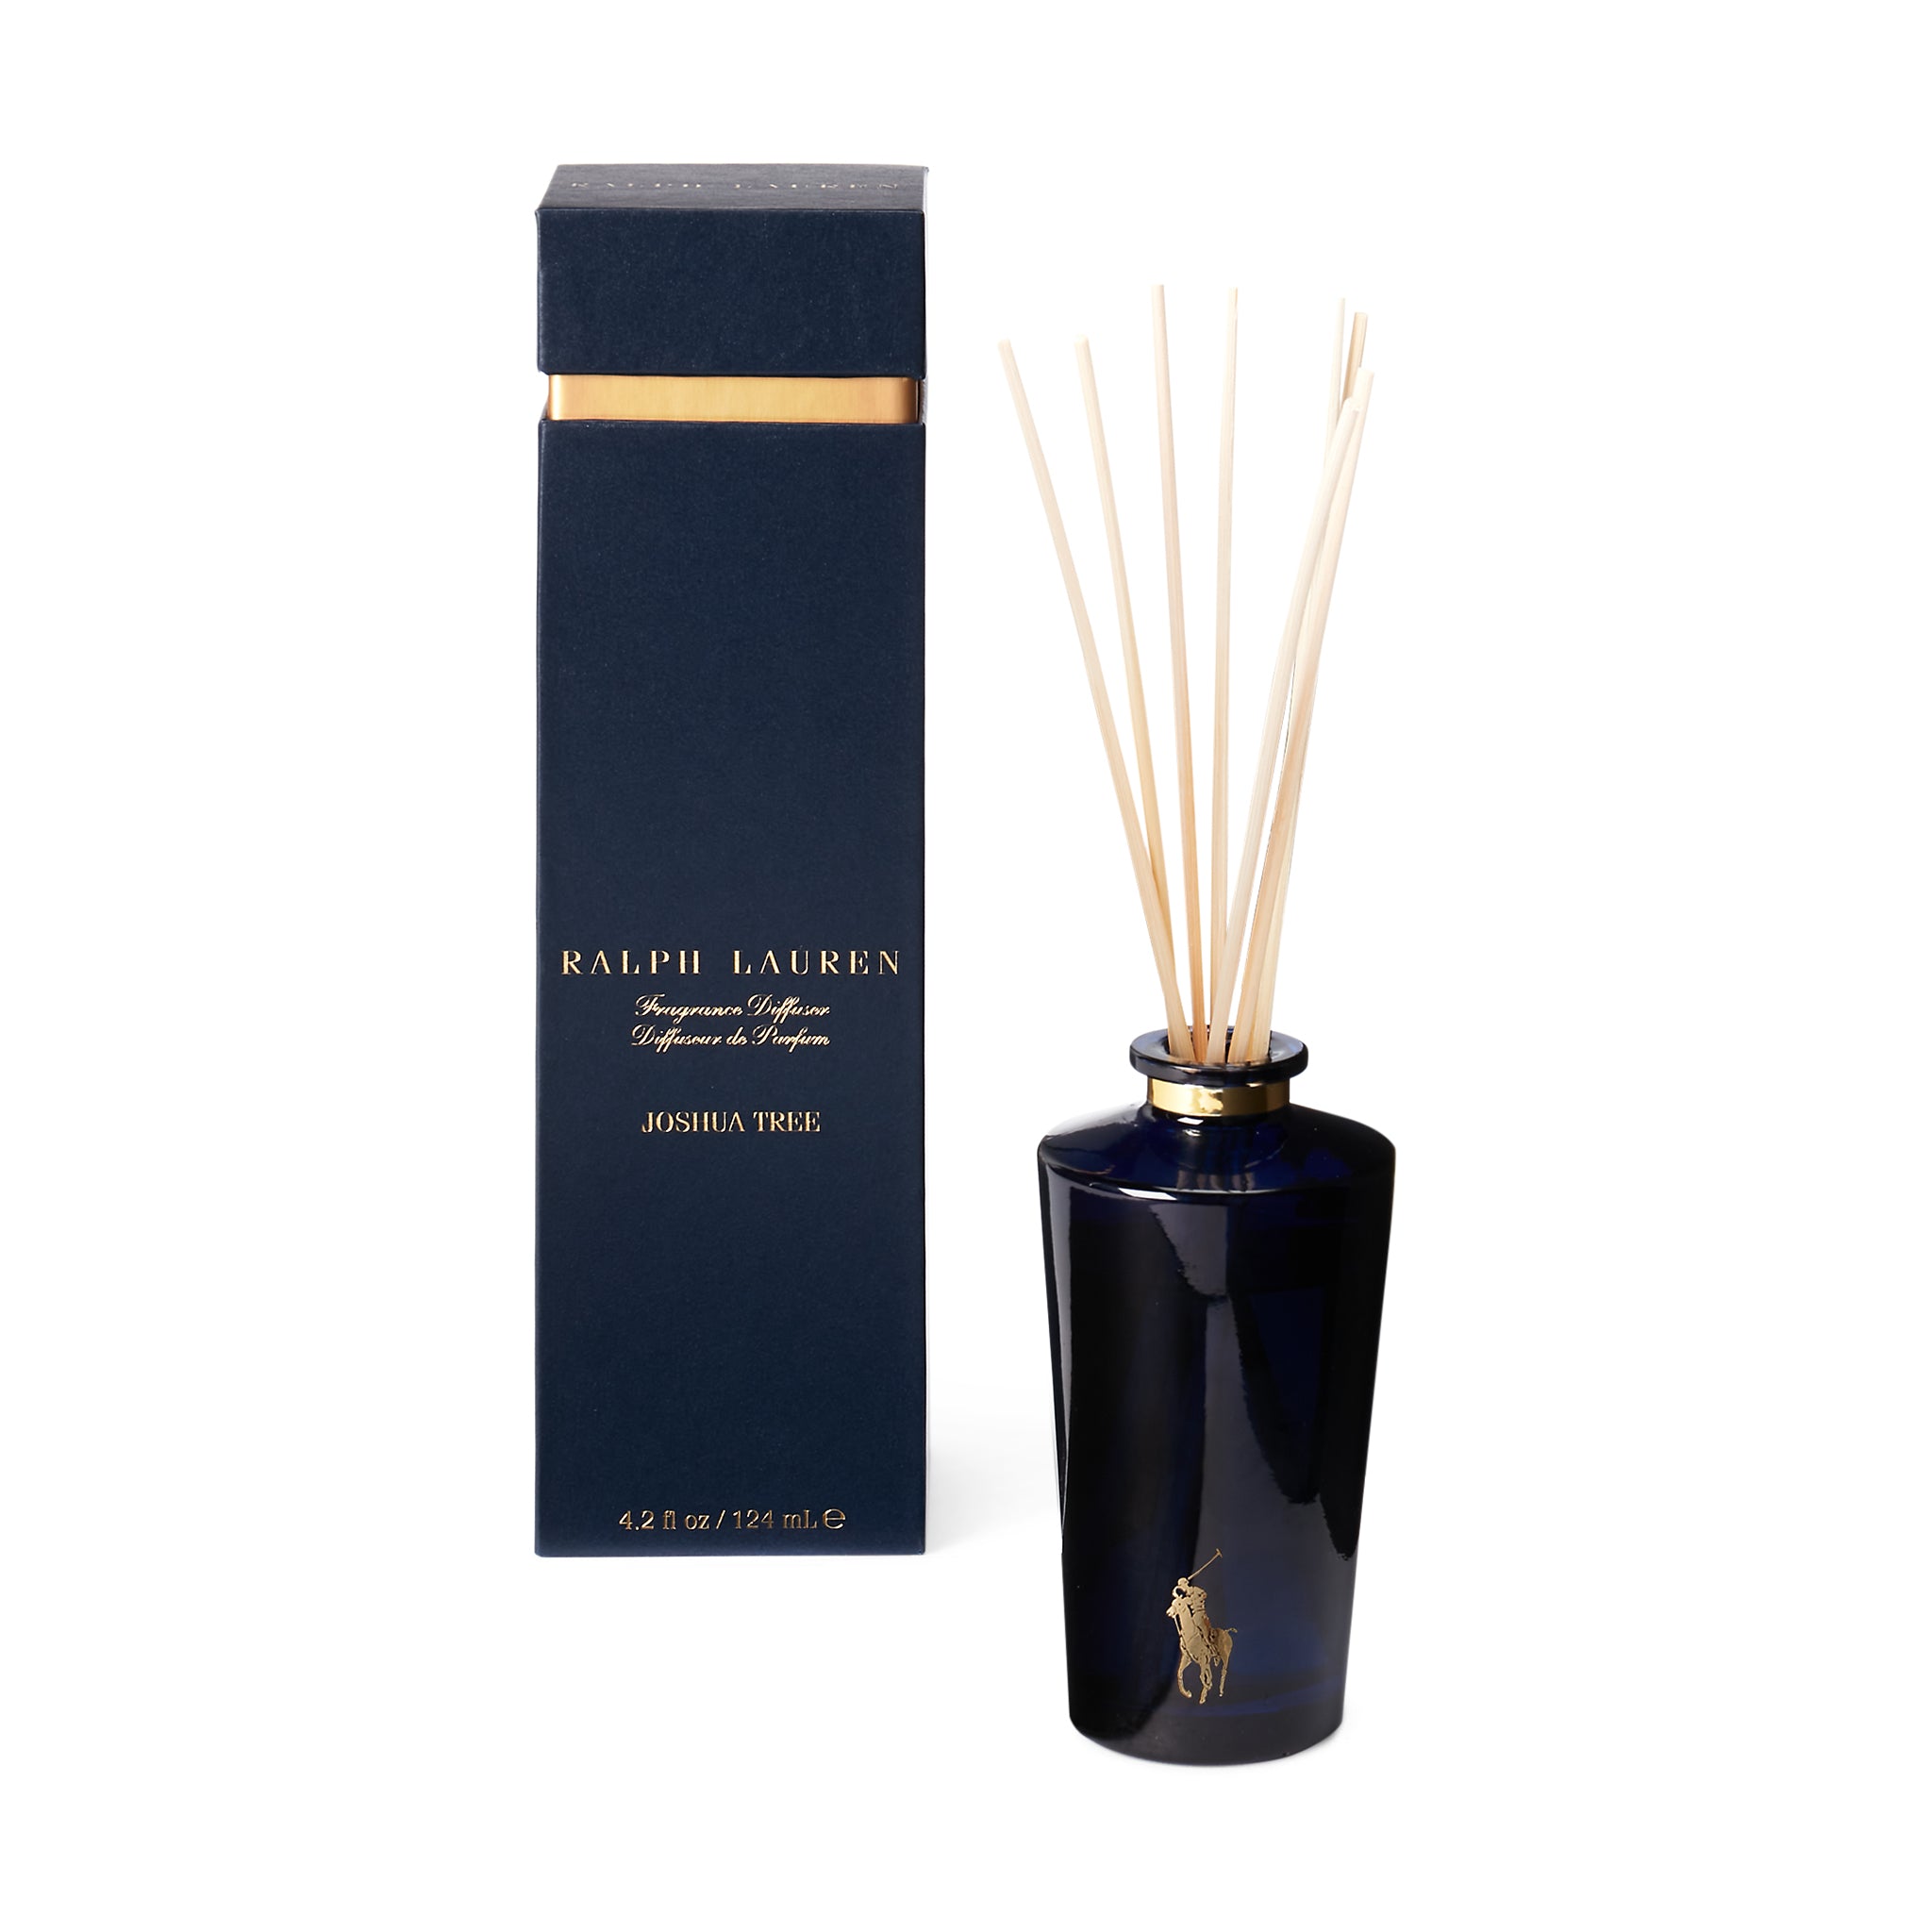 ralph lauren joshua tree diffuser navy and gold diffusers 